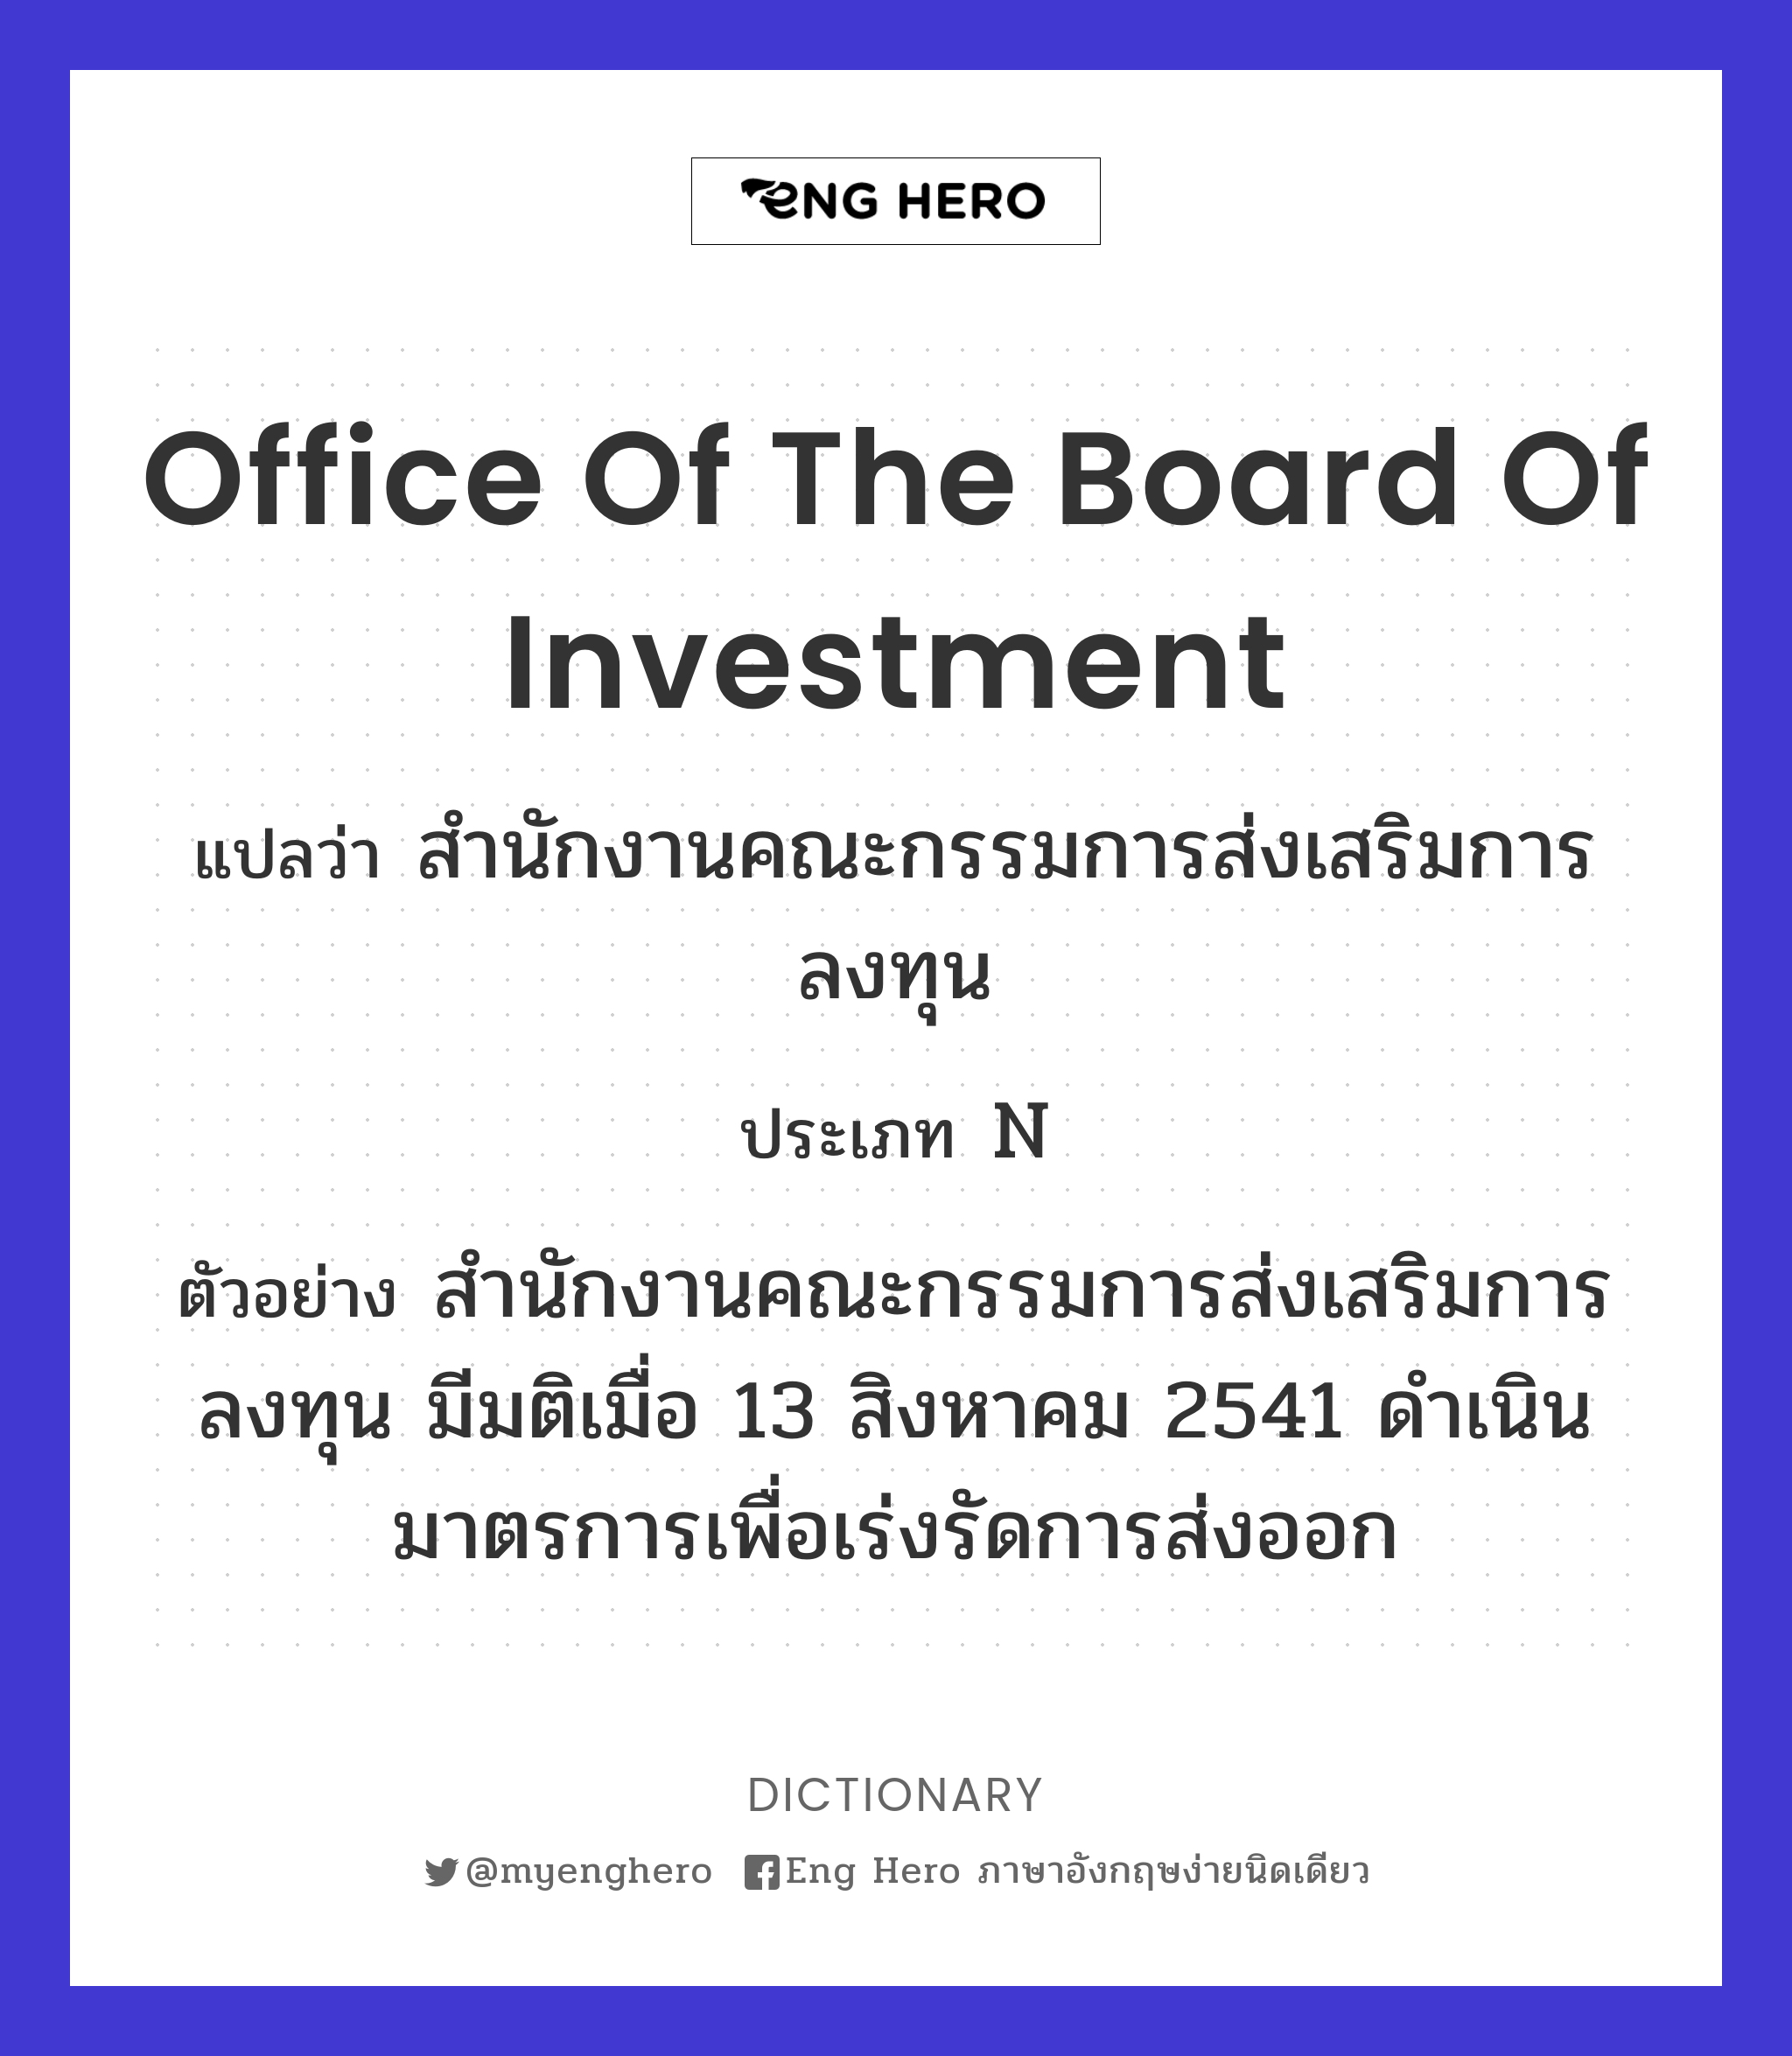 Office of the Board of Investment